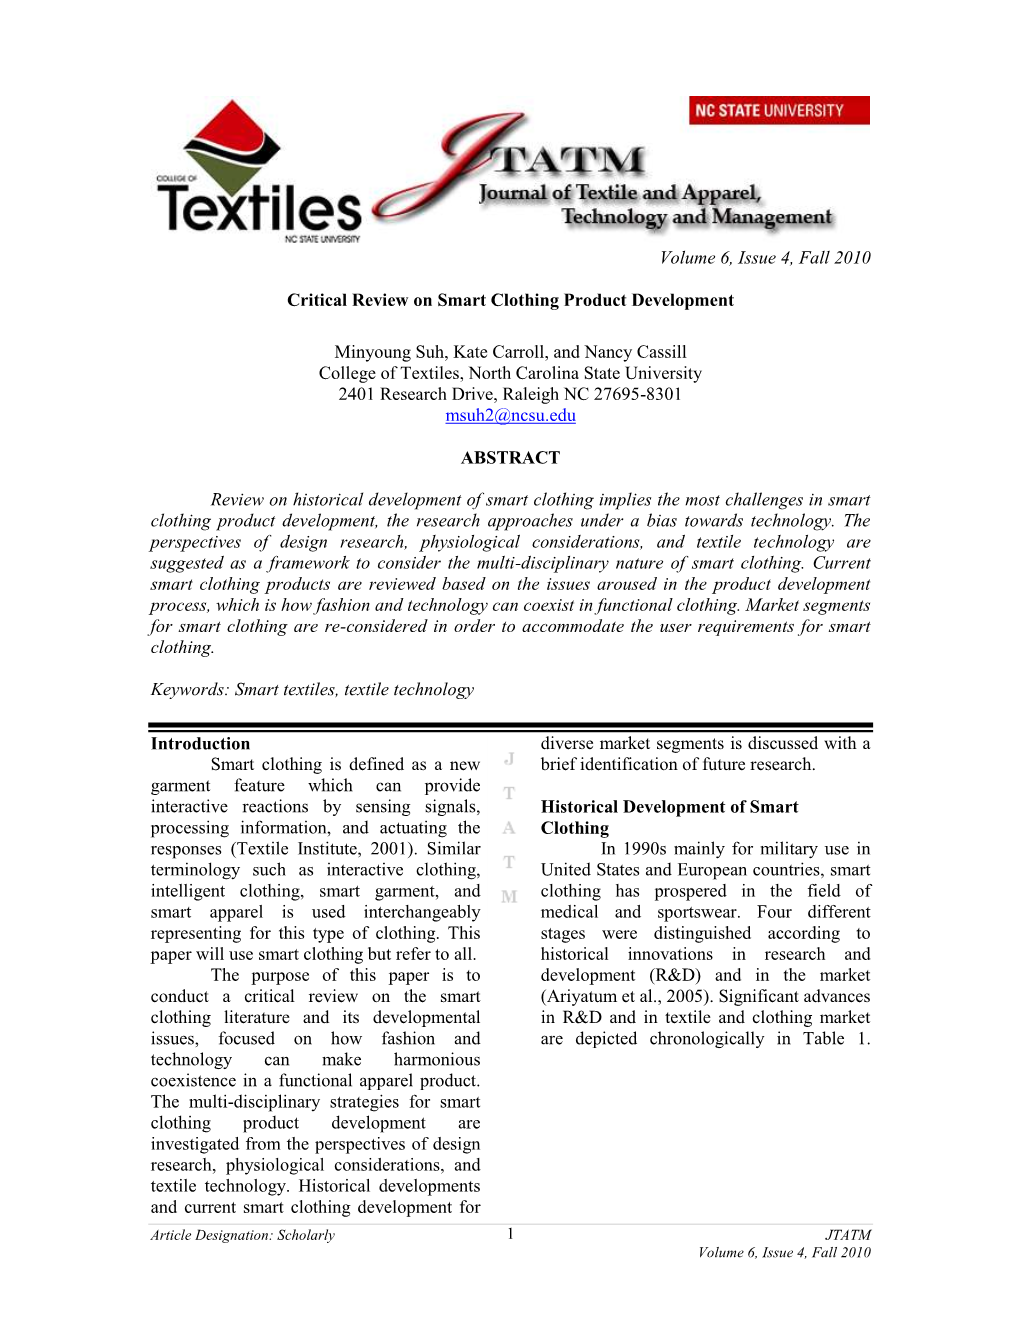 Critical Review on Smart Clothing Product Development